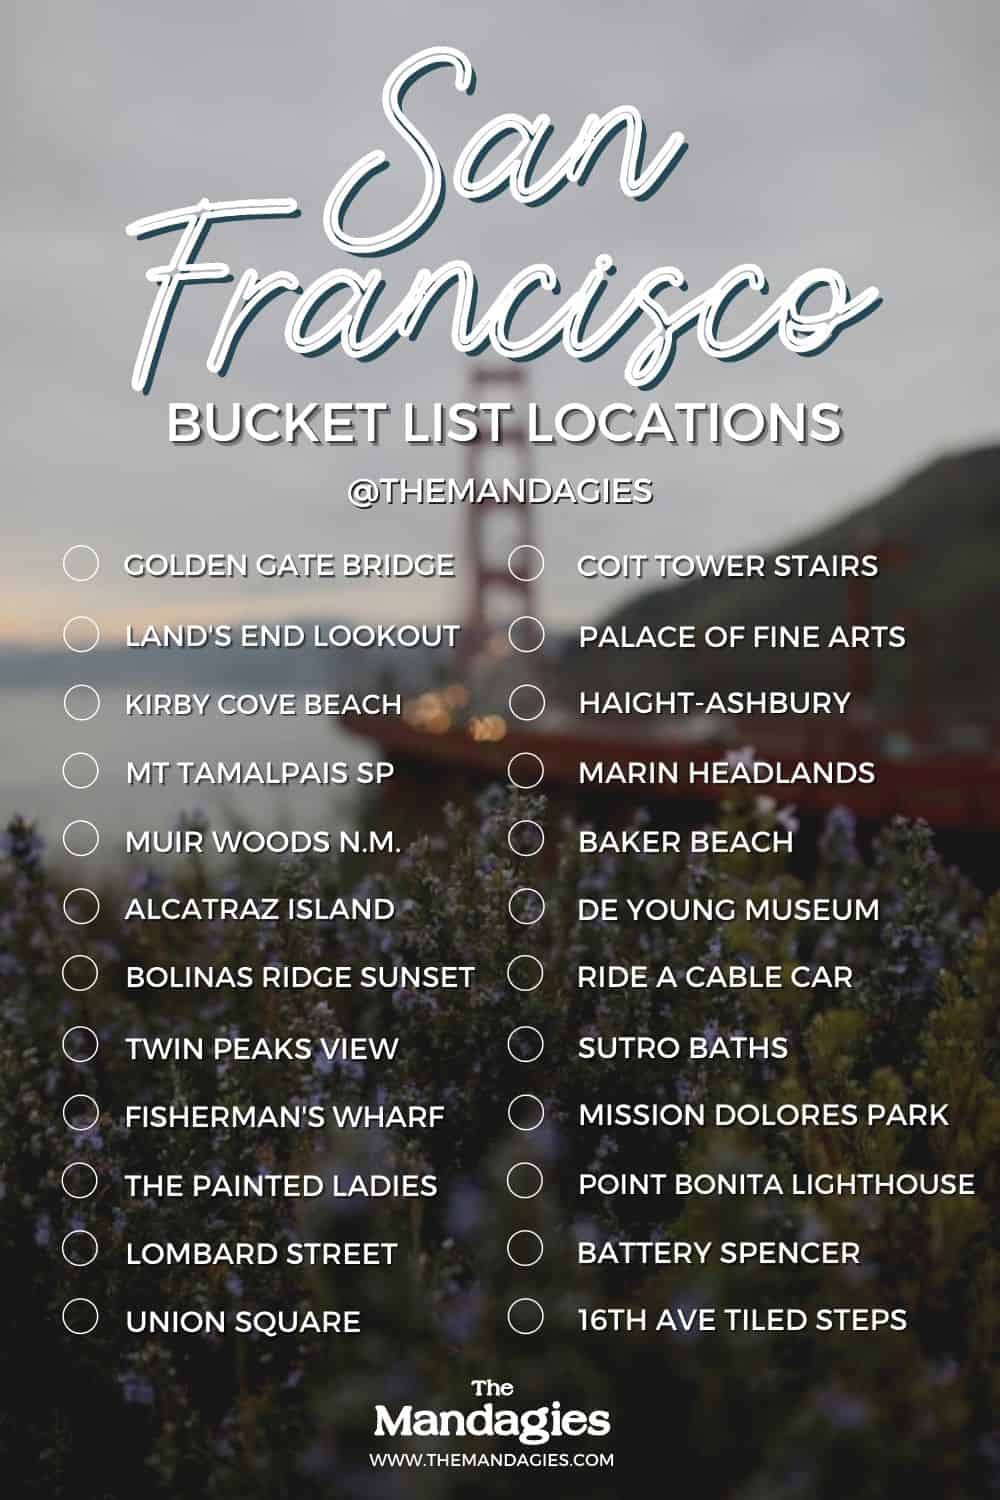 10 Things To Do In San Francisco: Adventure Edition | The Mandagies